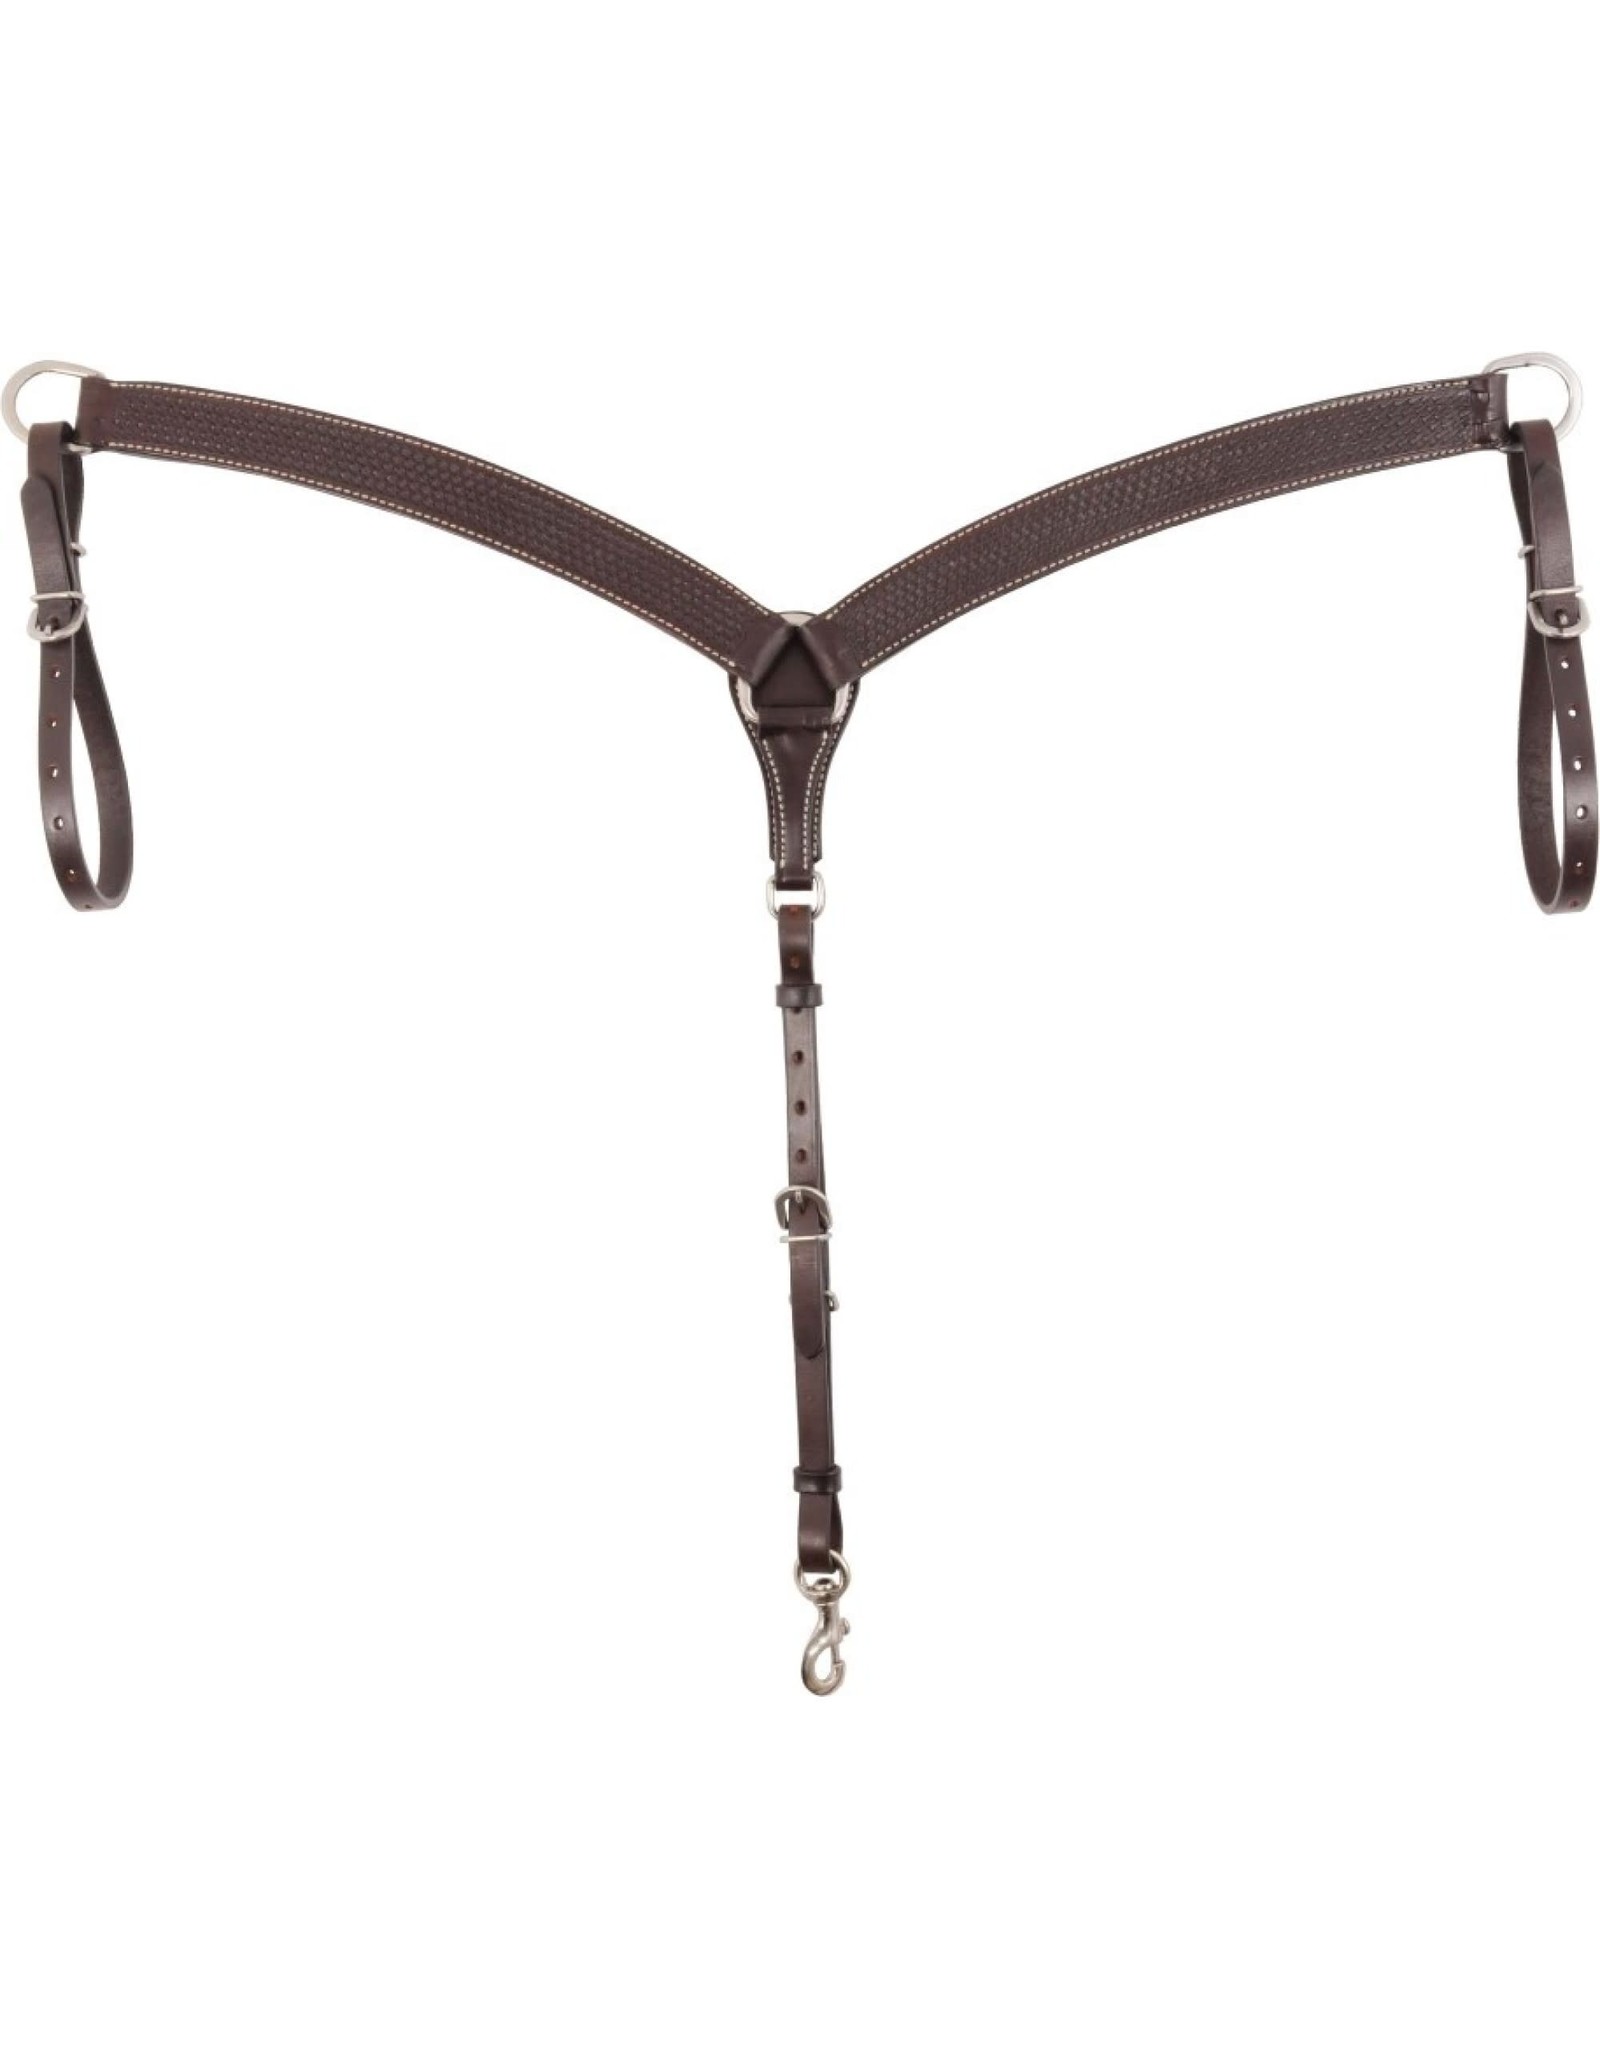 Country Legend Breast Collar With Basket Tooling -  Dark Brown - 224009-71